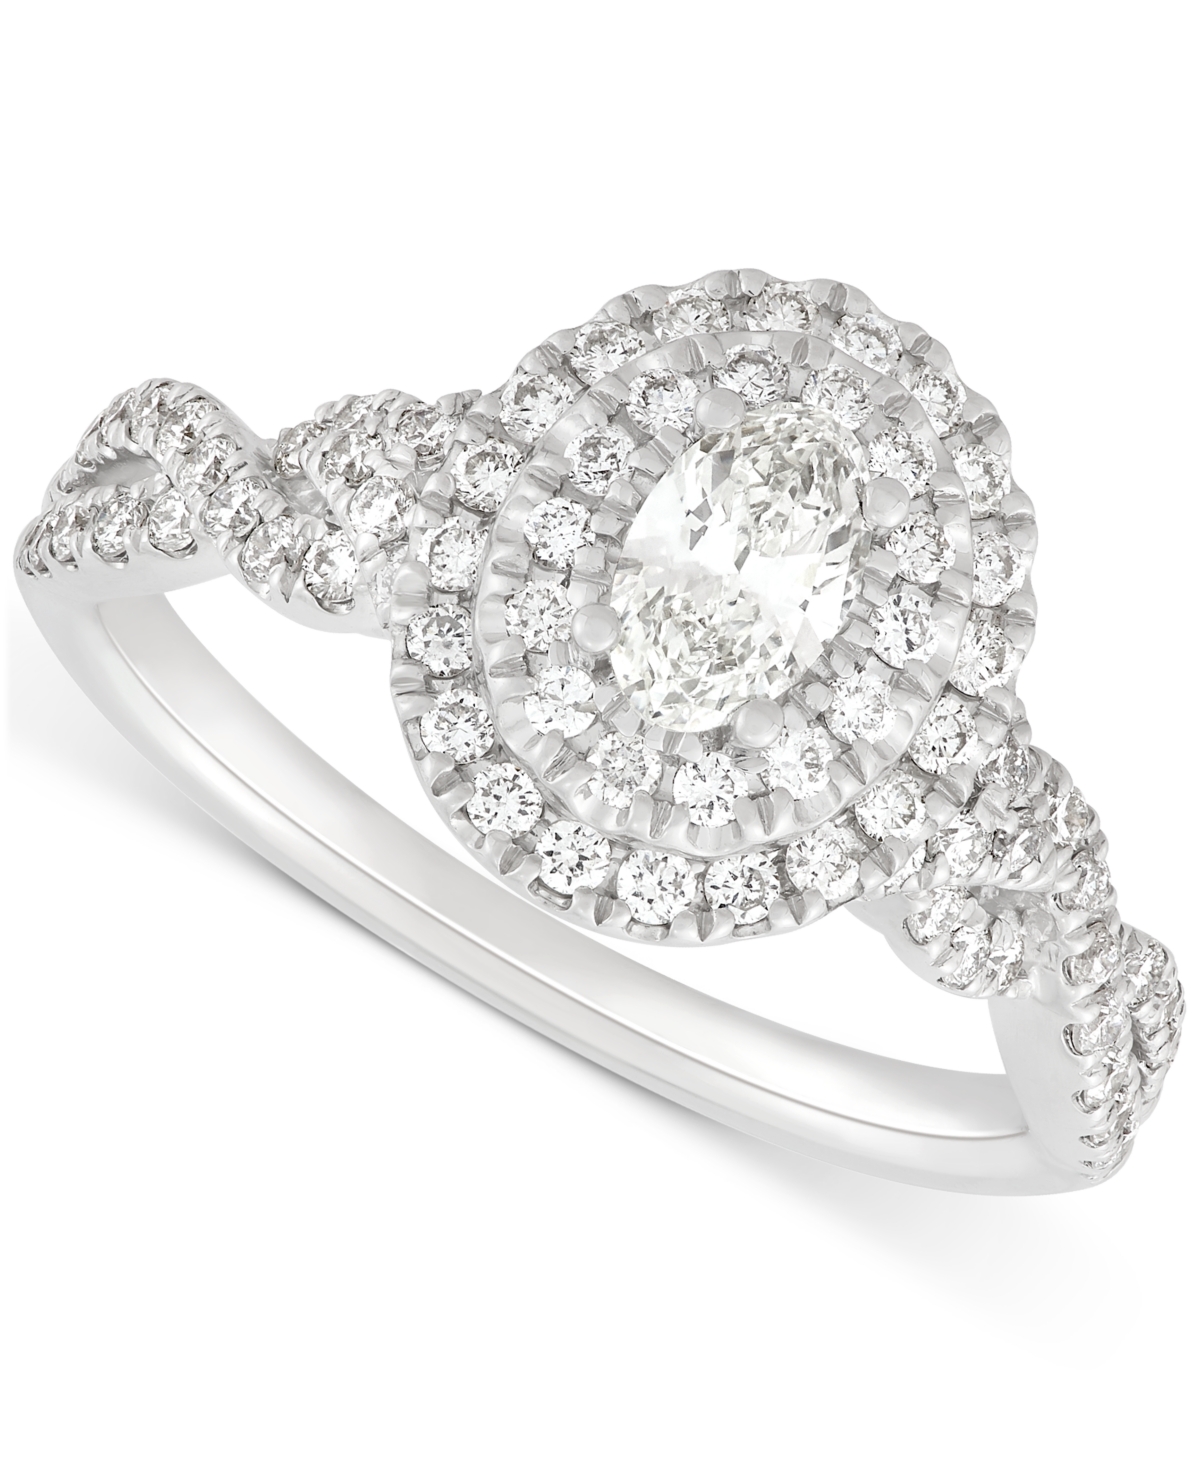 Diamond Oval Multi-Halo Twist Engagement Ring (1 ct. t.w.) in 14k White Gold - White Gold